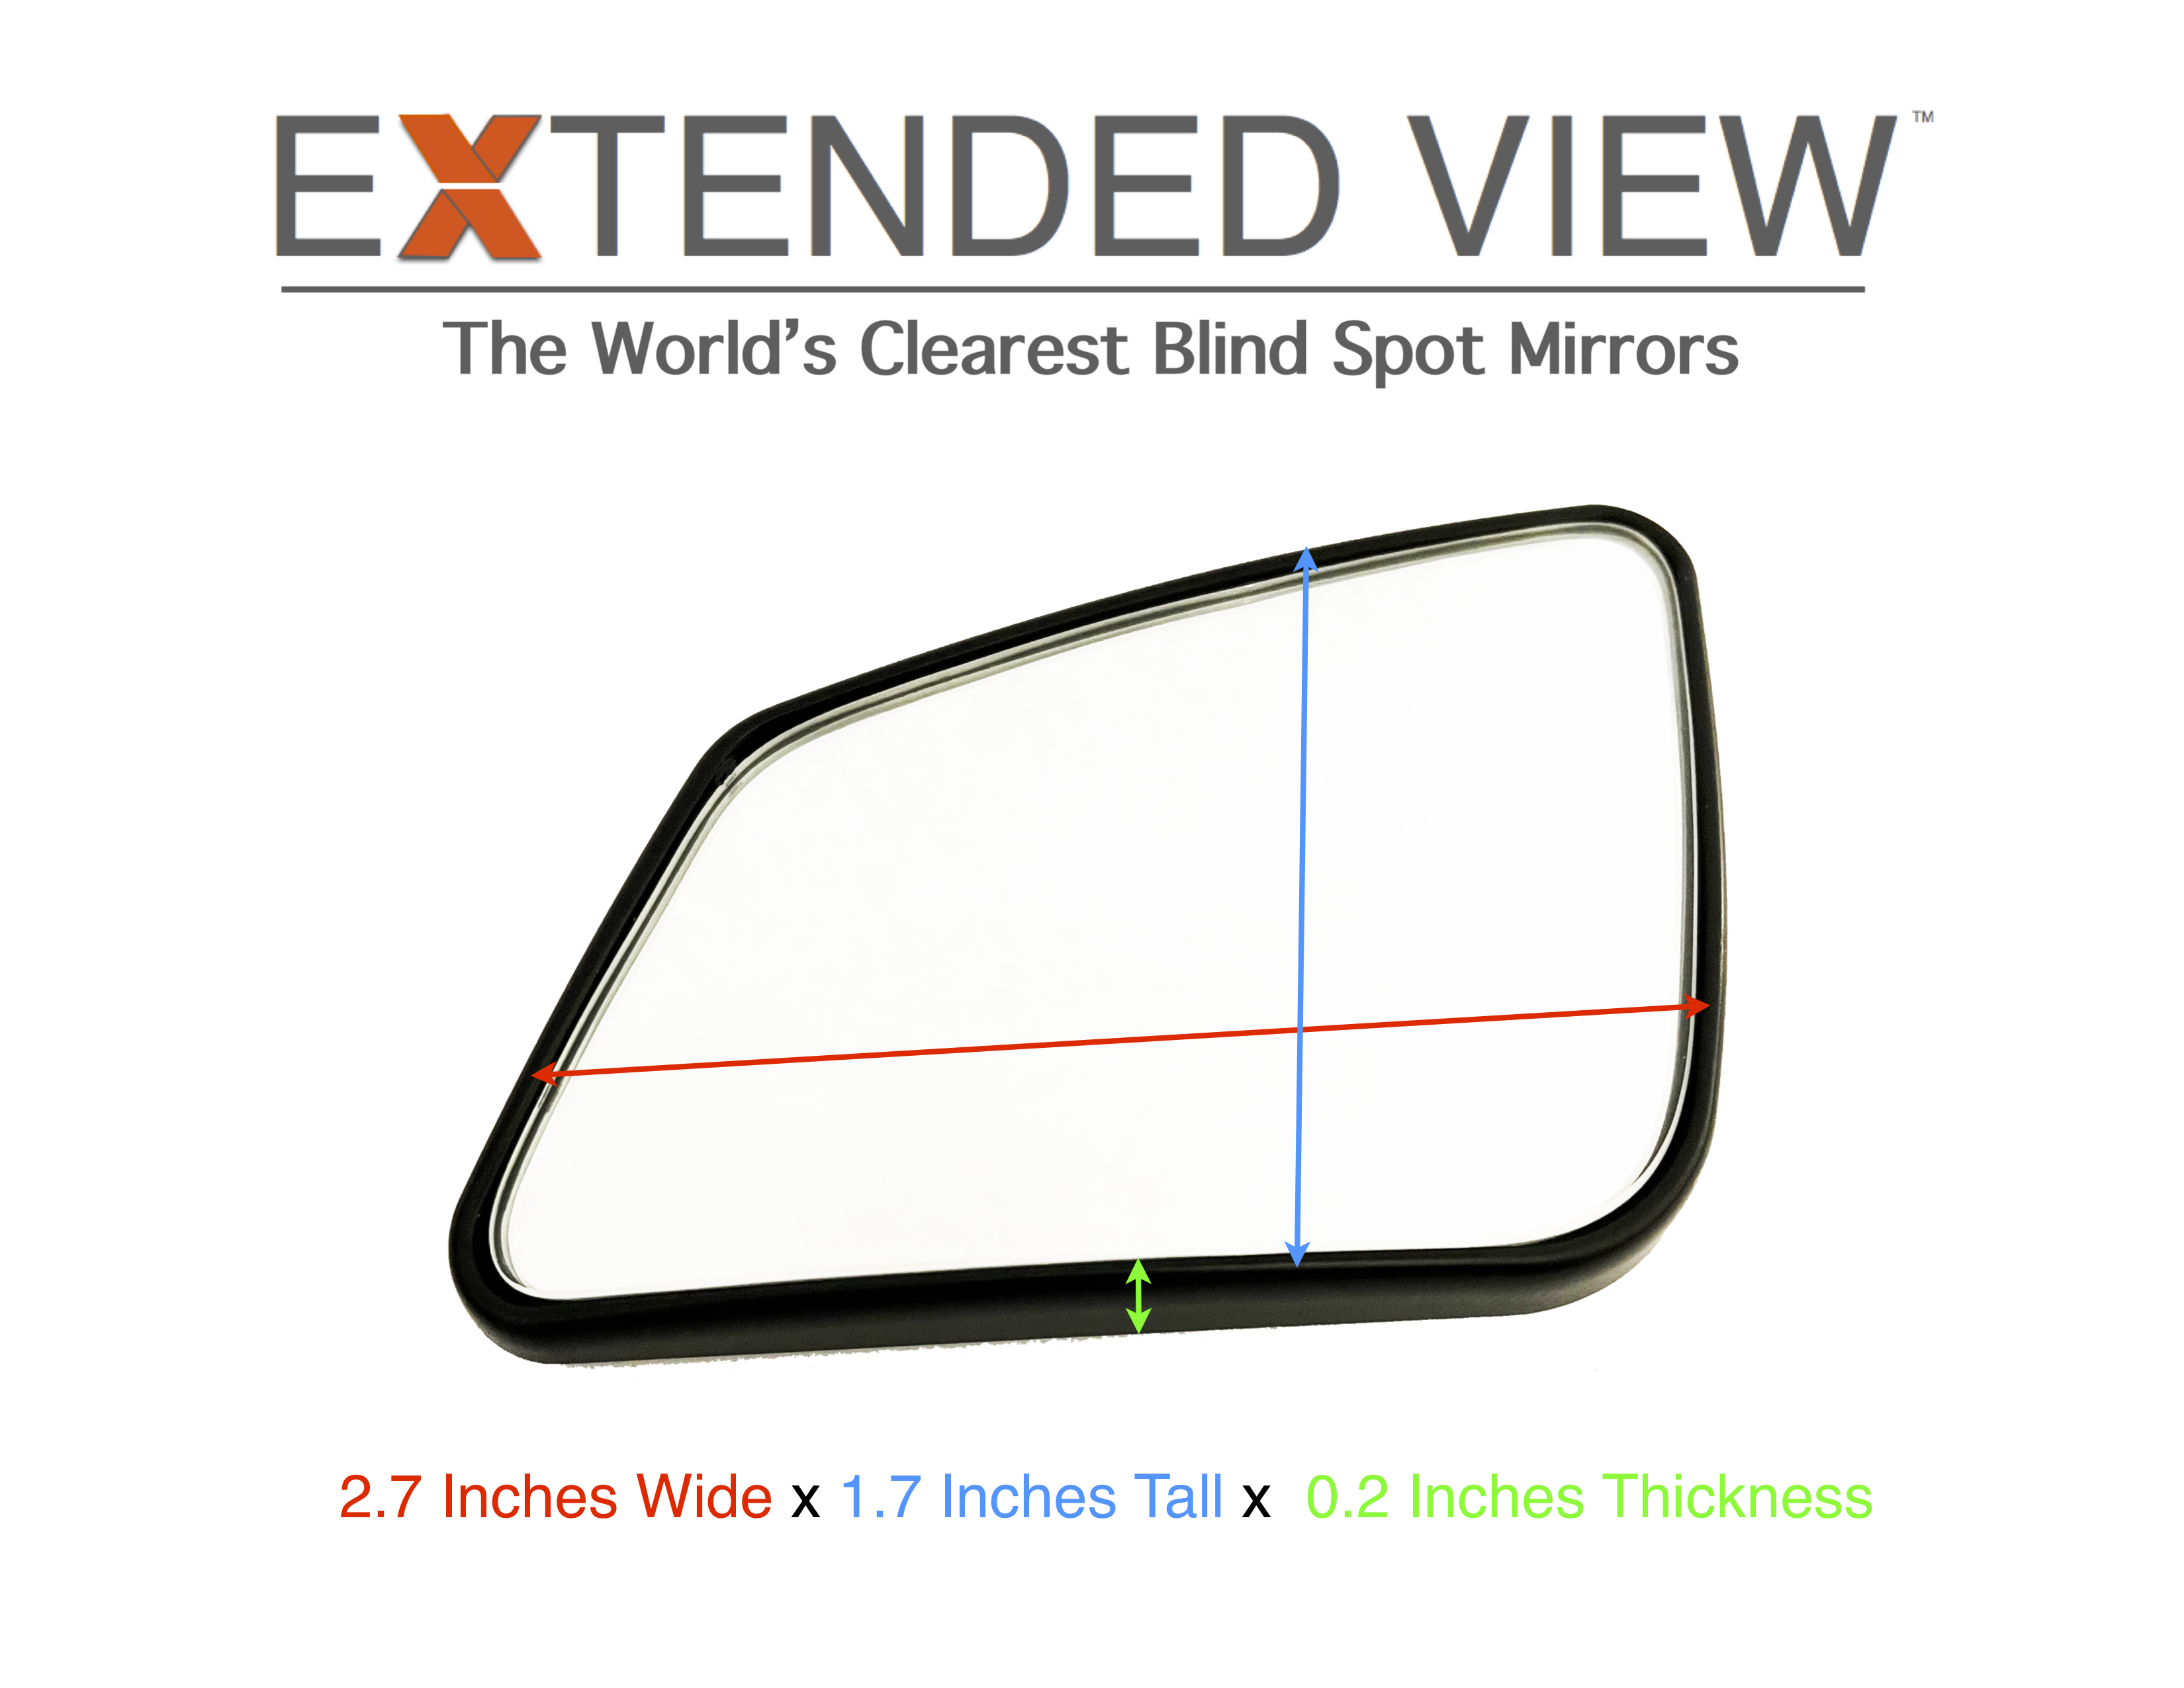 BMW 6 Series Blind Spot Mirrors | F13 Extended View™